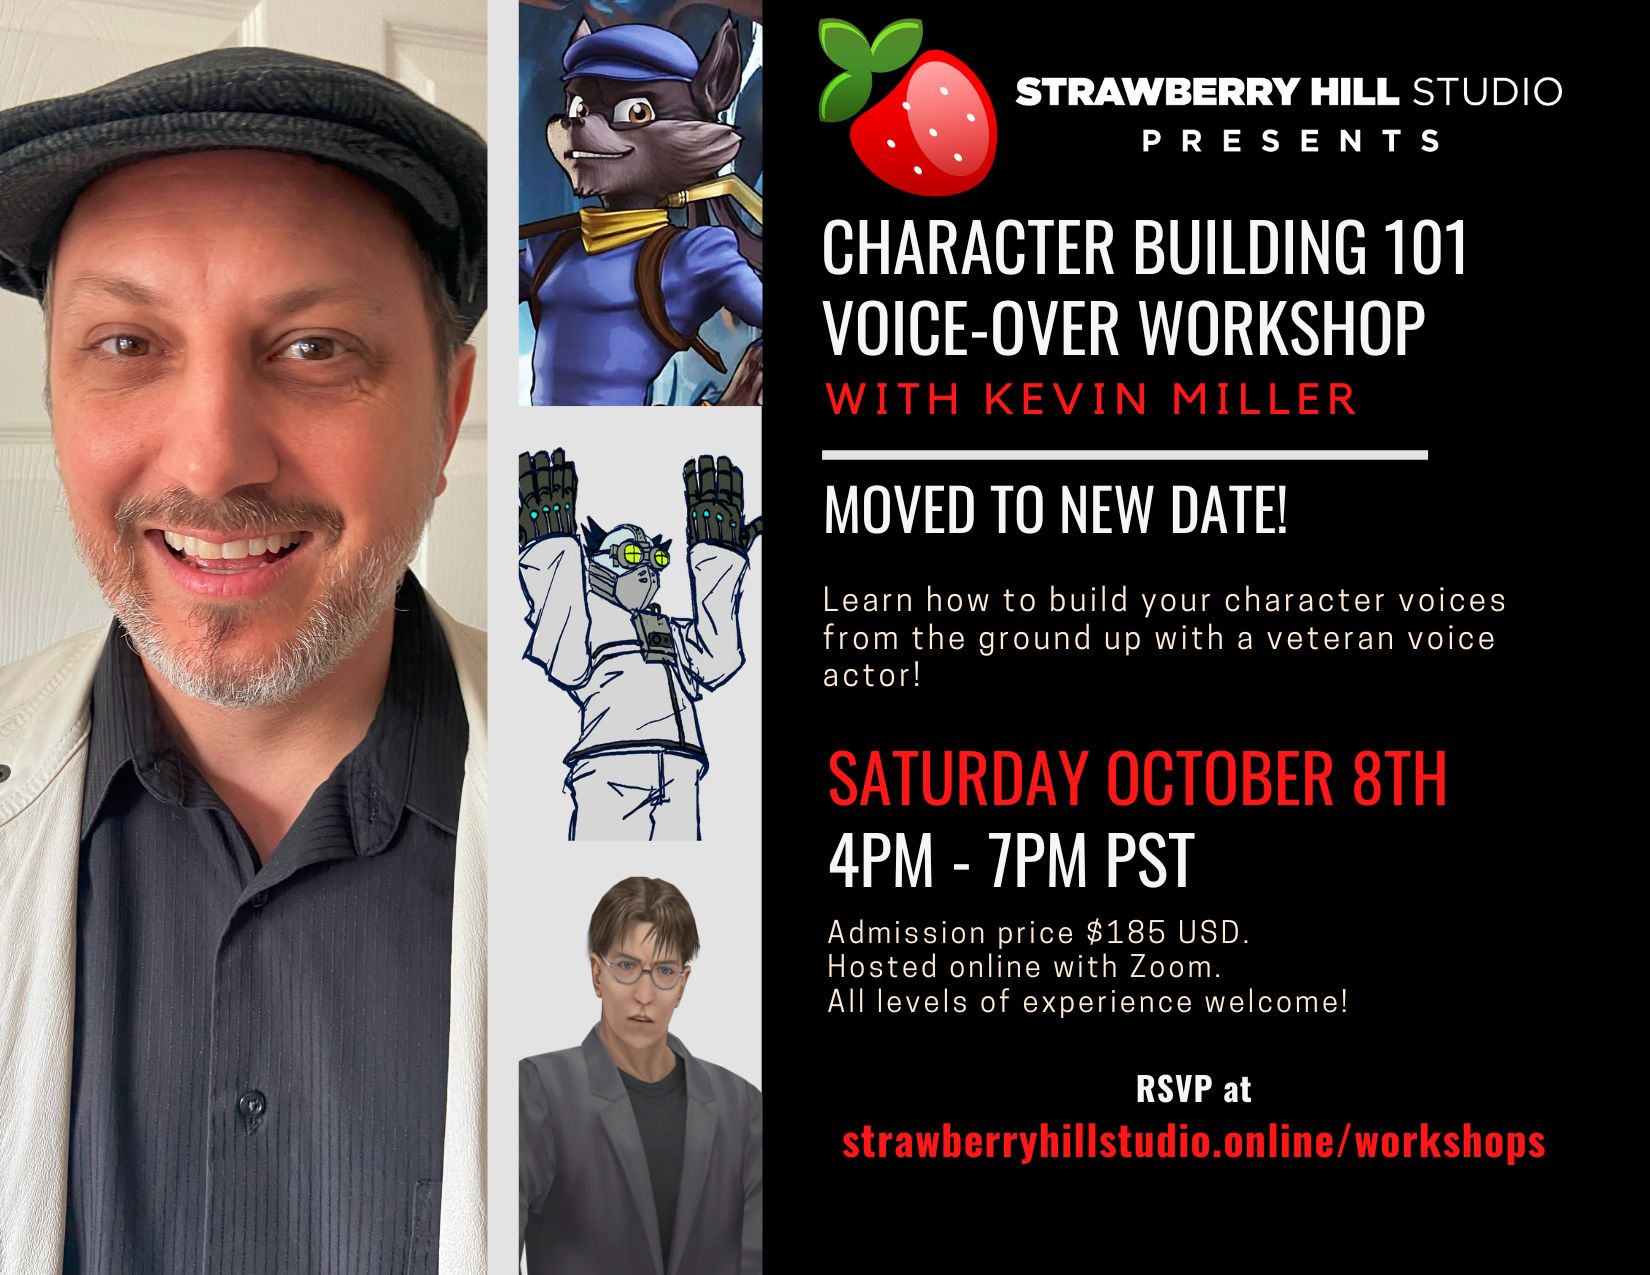 NEW DATE - Character Building 101 Voice-Over Workshop w/ Kevin Miller